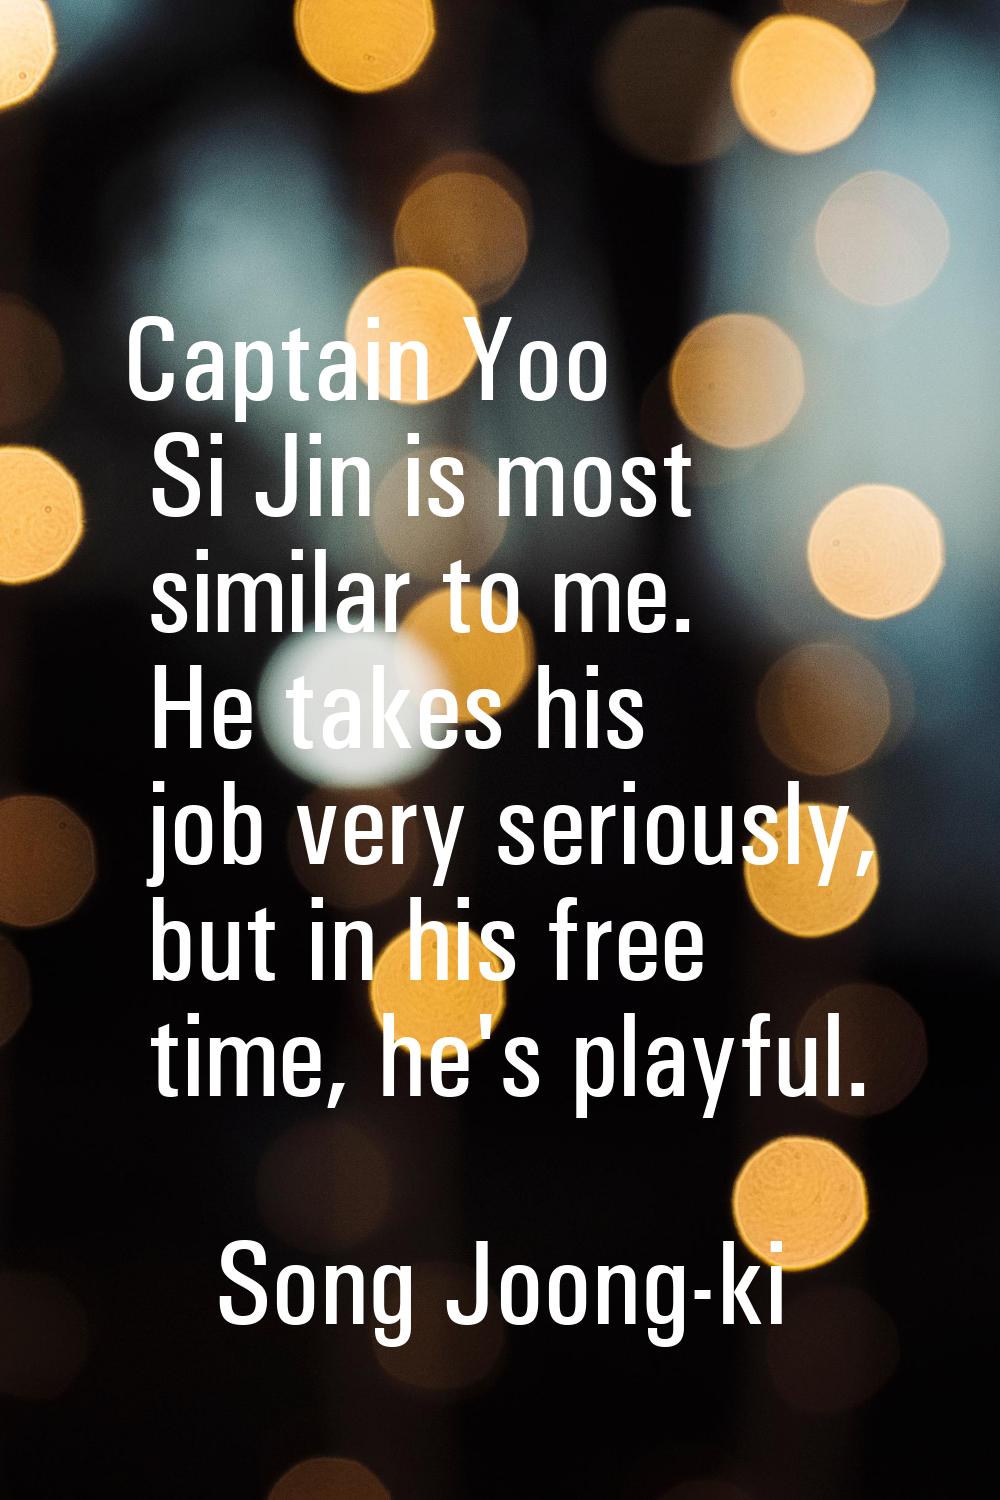 Captain Yoo Si Jin is most similar to me. He takes his job very seriously, but in his free time, he